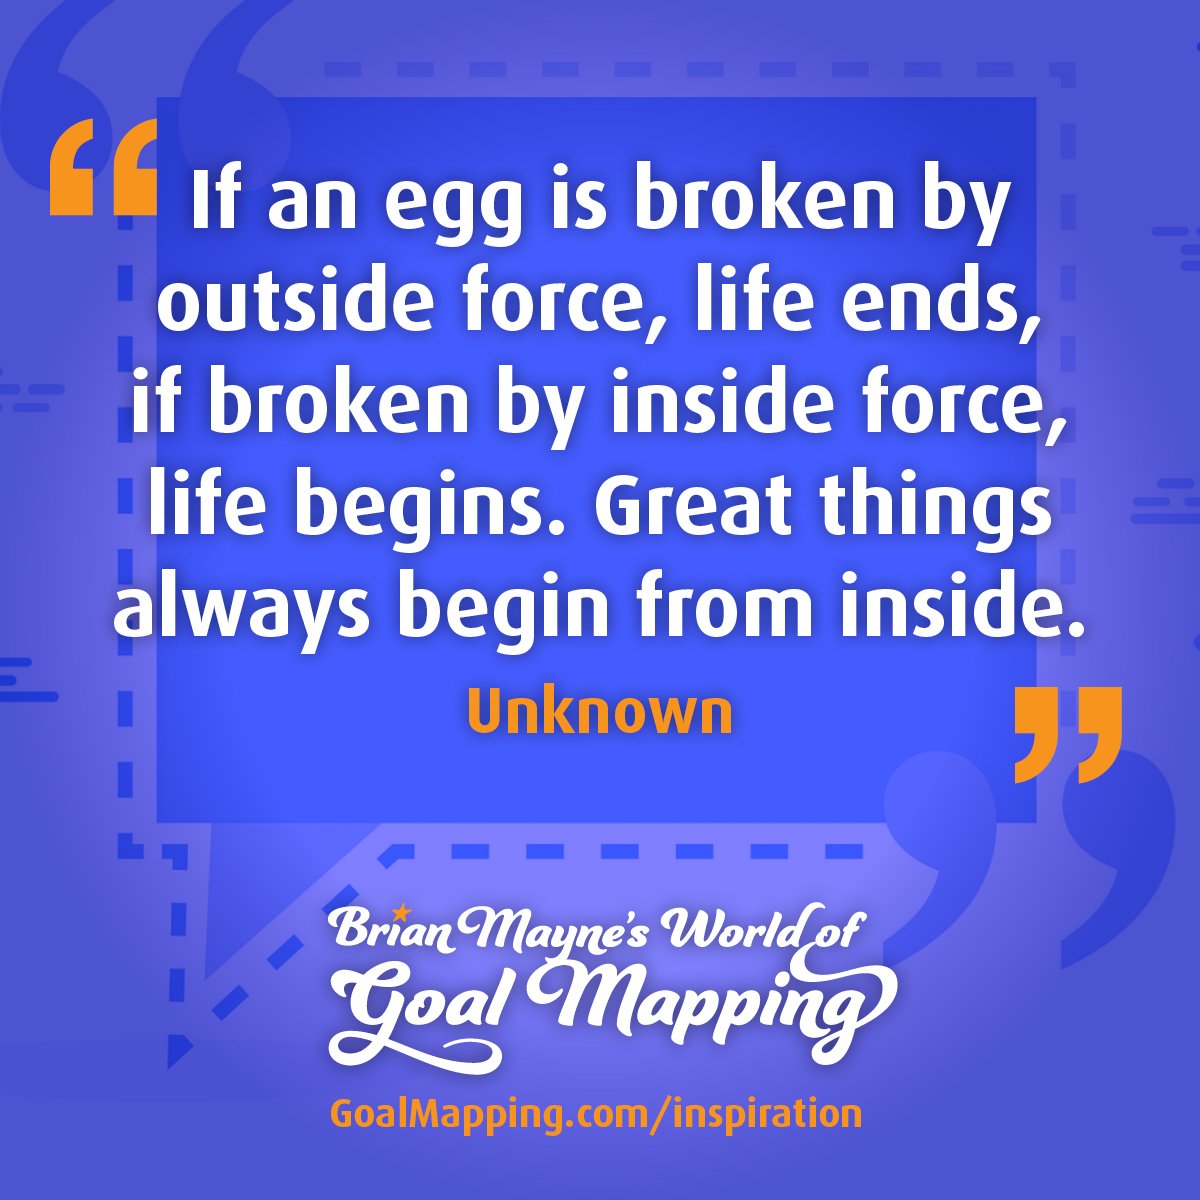 "If an egg is broken by outside force, life ends, if broken by inside force, life begins. Great things always begin from inside." Unknown